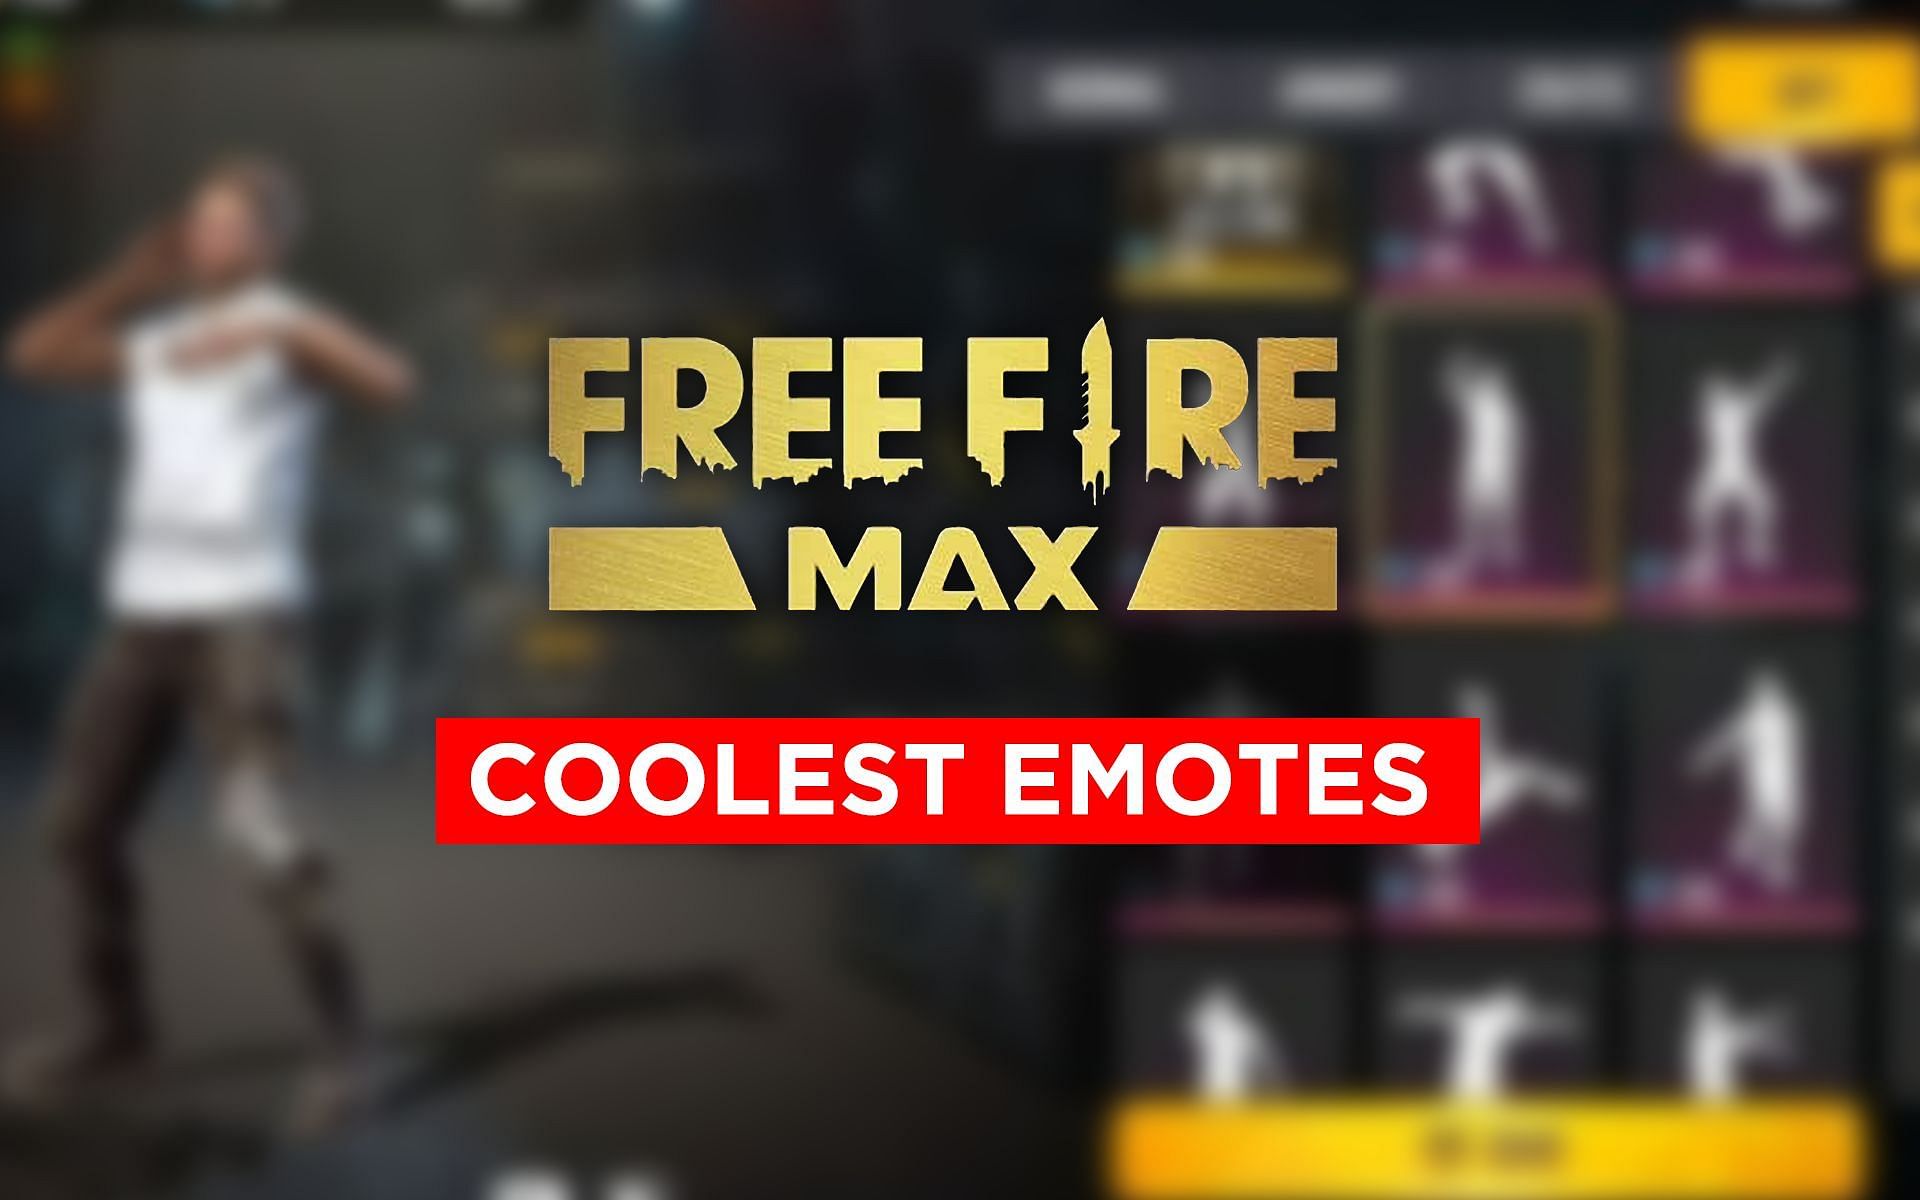 Coolest emotes in Free Fire Max as of October 2021 (Image via Sportskeeda)